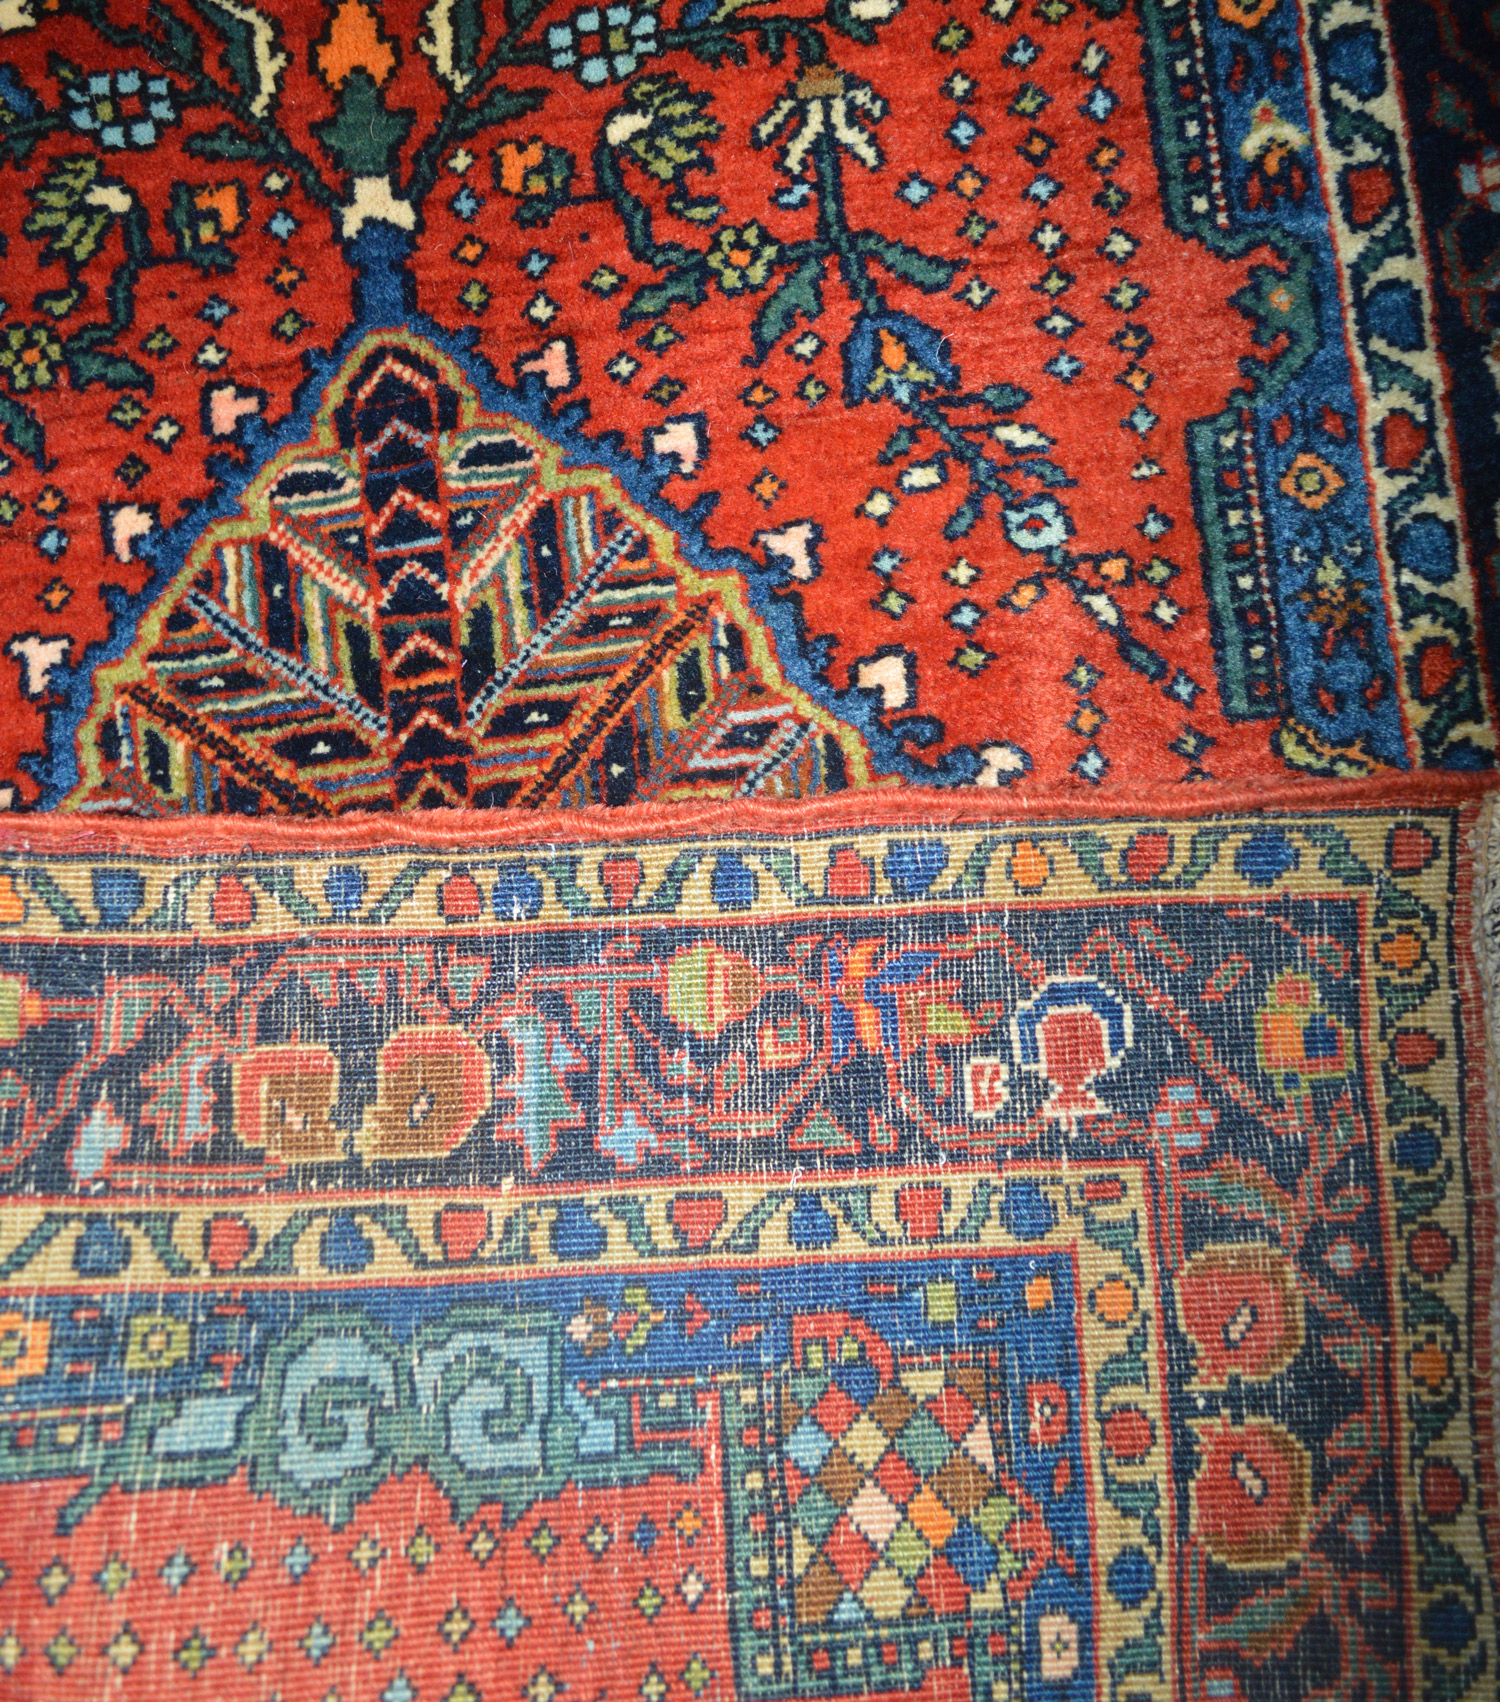 Douglas Stock Gallery antique Oriental rugs Boston,MA area New England - Detail of a fine and densely woven antique Persian Fereghan Sarouk mat (small rugs) with stylized floral motifs on a brick red field, circa 1915